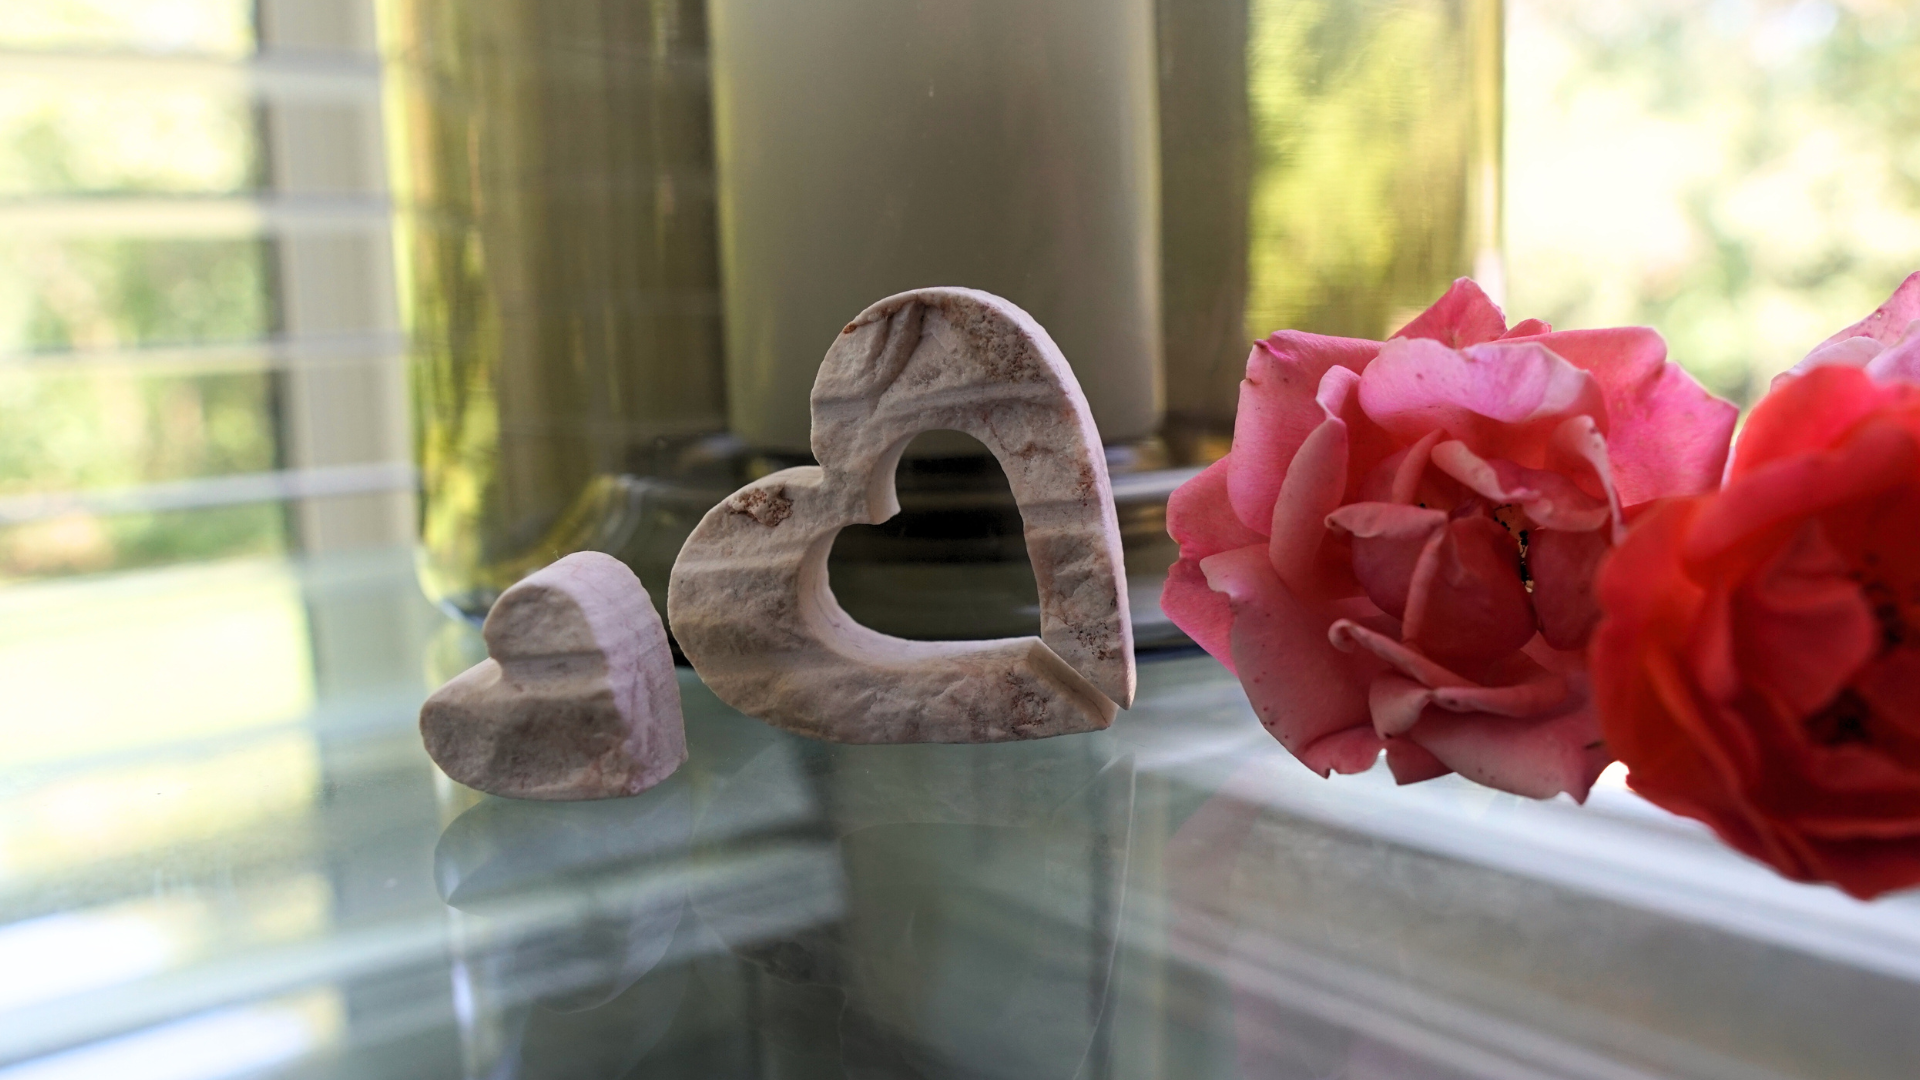 Nesting hearts made from Jerusalem Stone on table with flowers